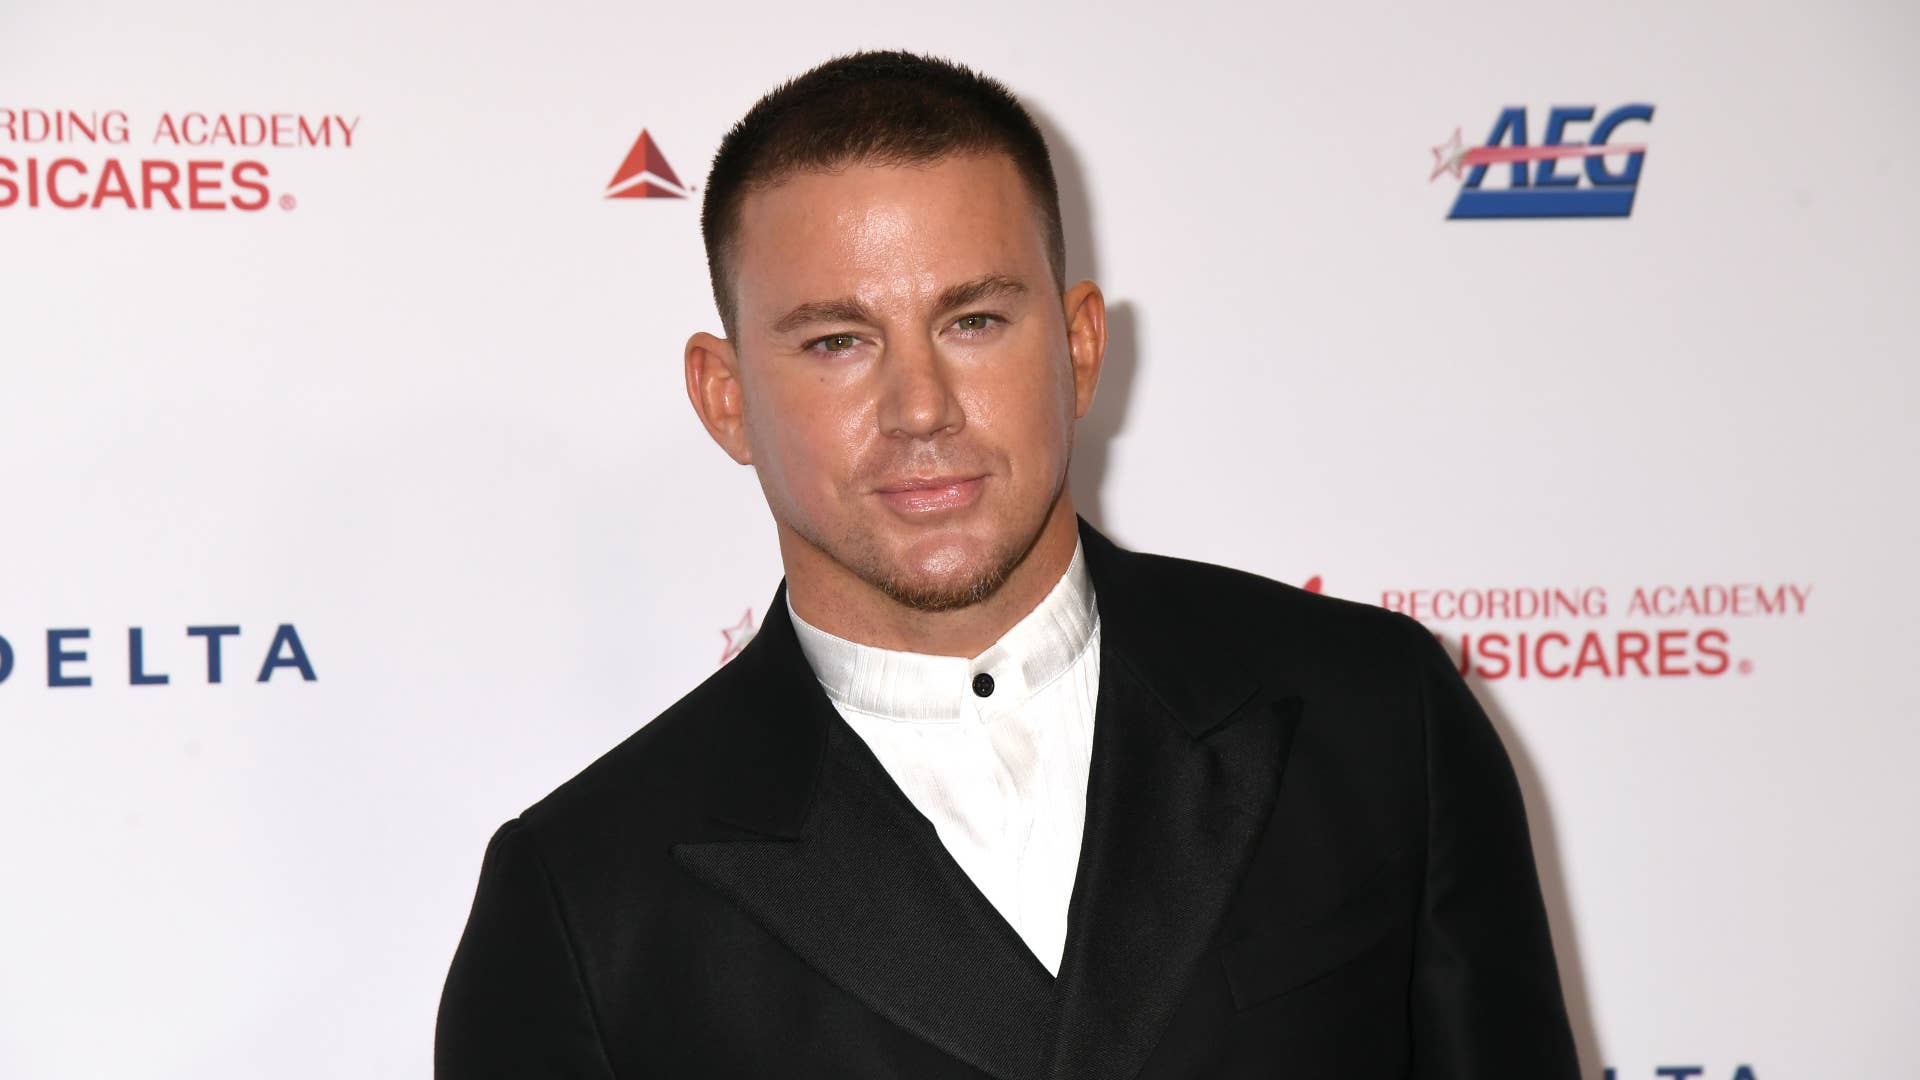 Channing Tatum attends MusiCares Person of the Year honoring Aerosmith.